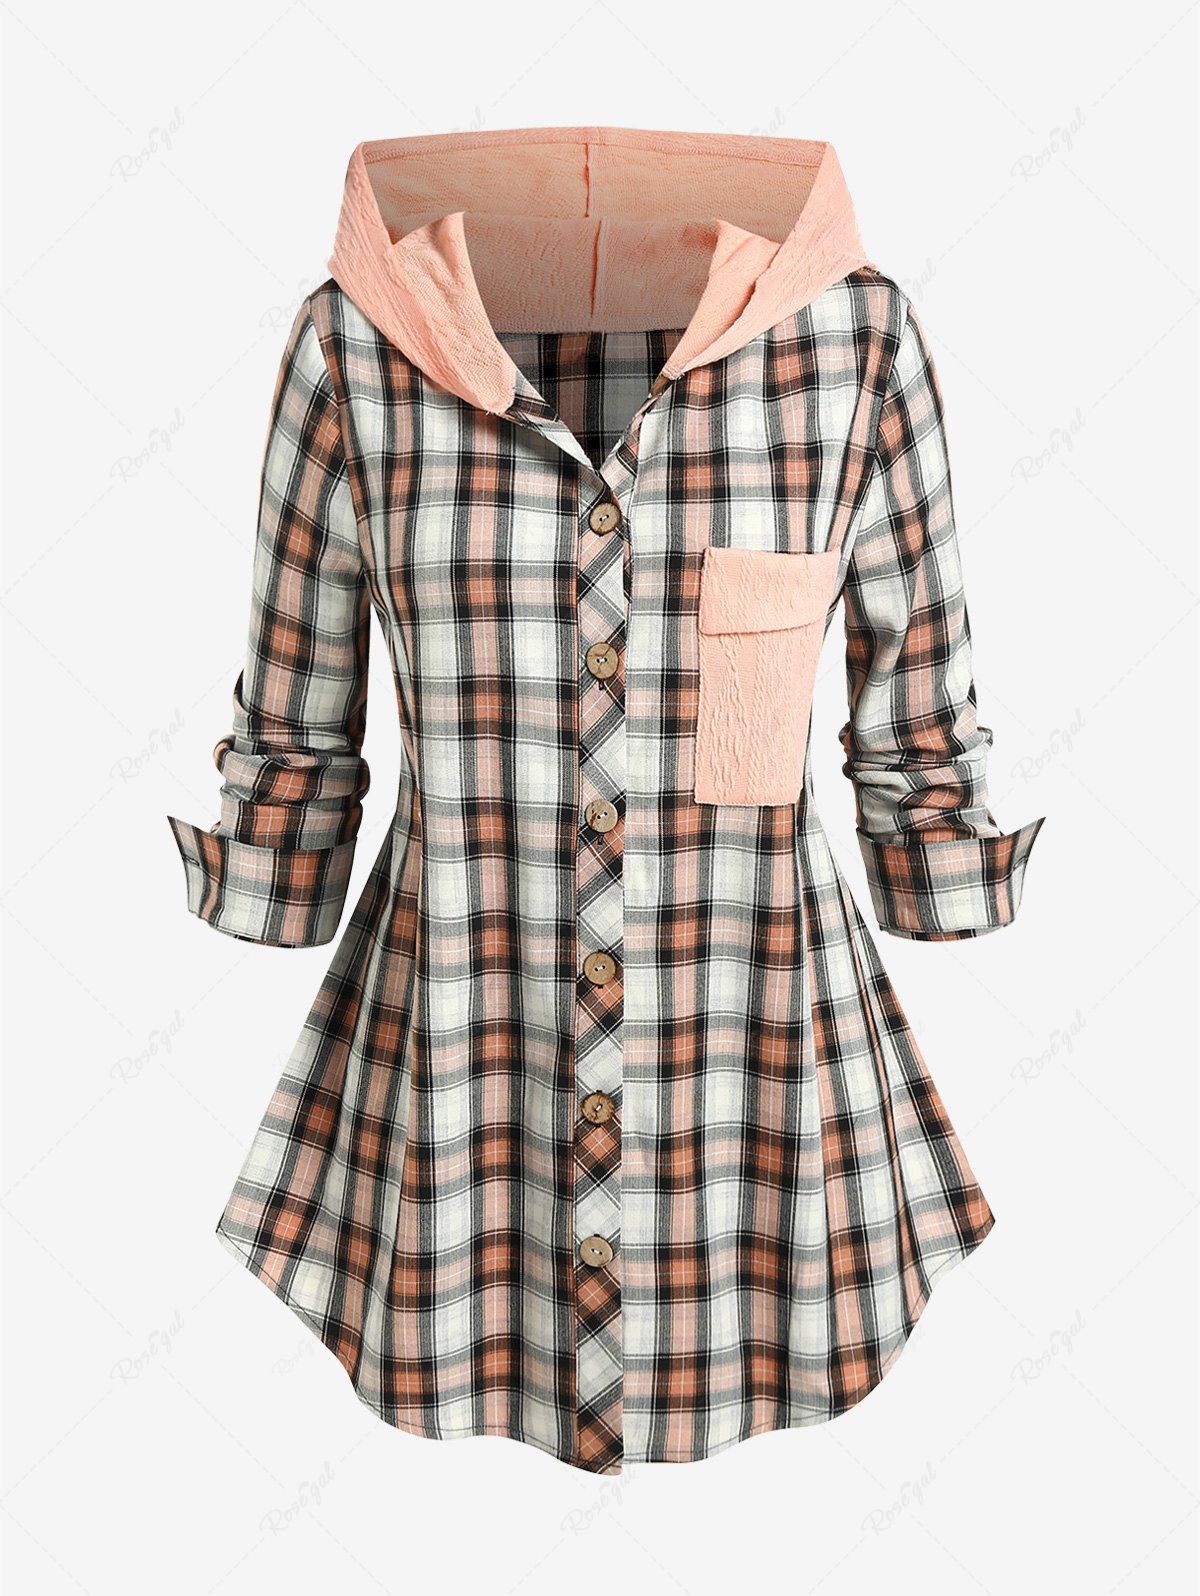 Trendy Plus Size Plaid Colorblock Textured Hooded Shirt with Pocket  